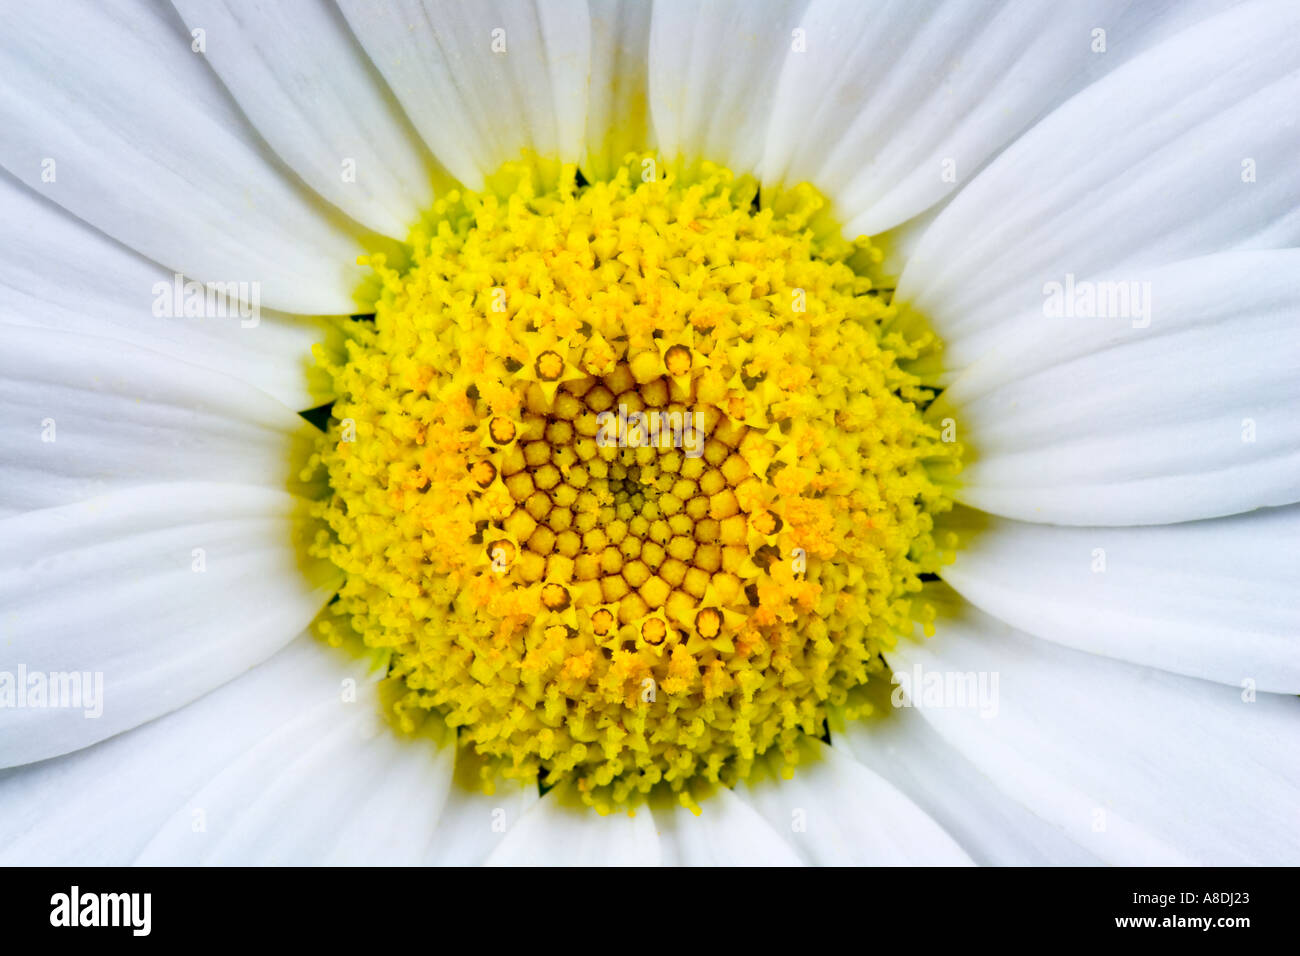 Oxeye Daisy Chrysanthemum leucanthemum close up showing detail and soft texture of flower potton Stock Photo